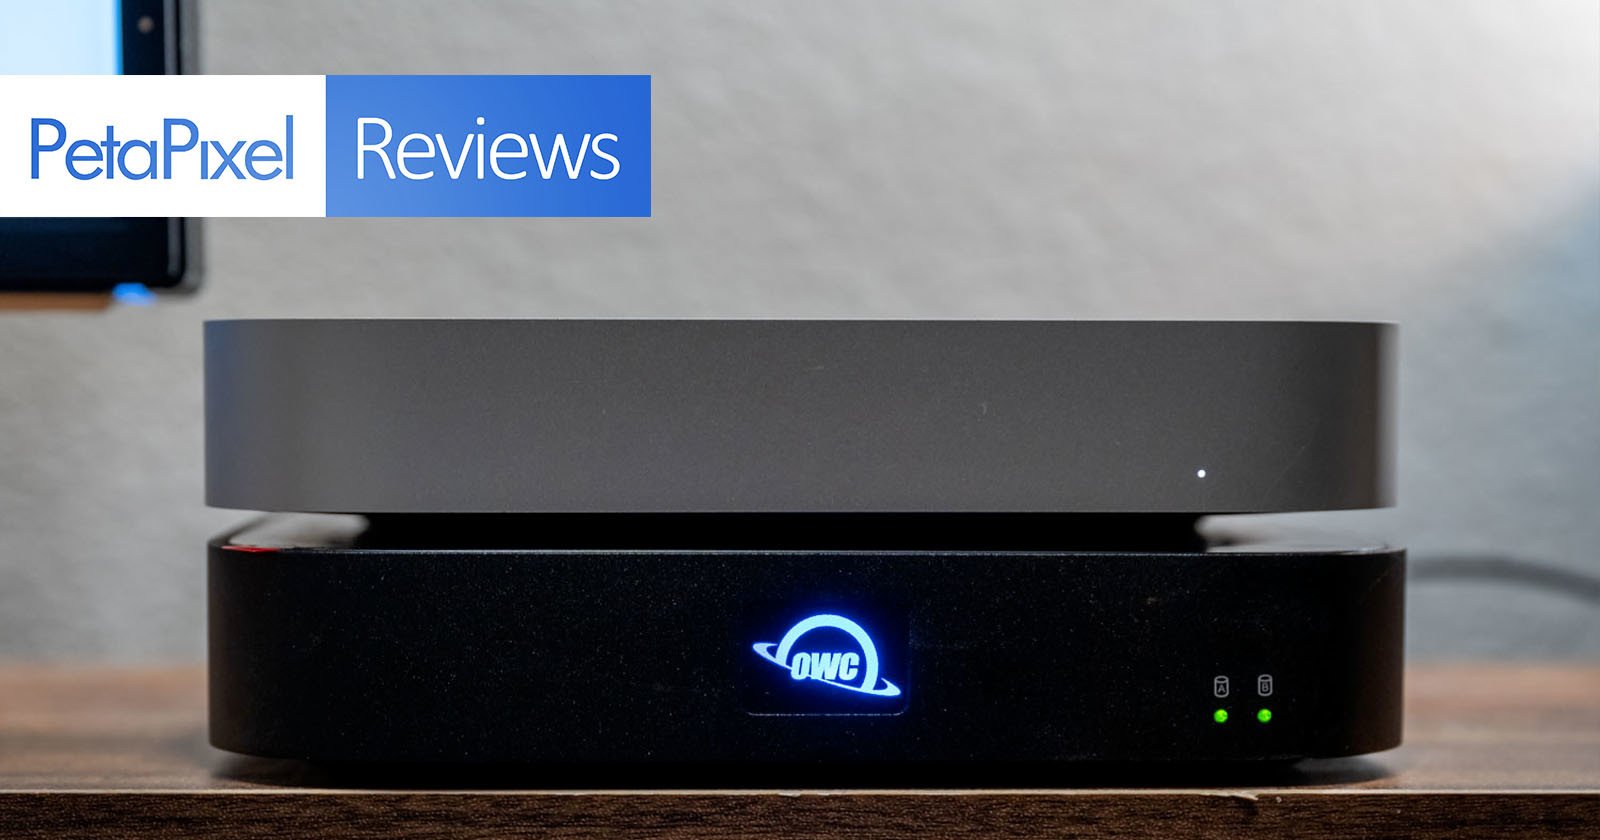 OWC miniStack STX Review: The Perfect Partner for the Mac mini